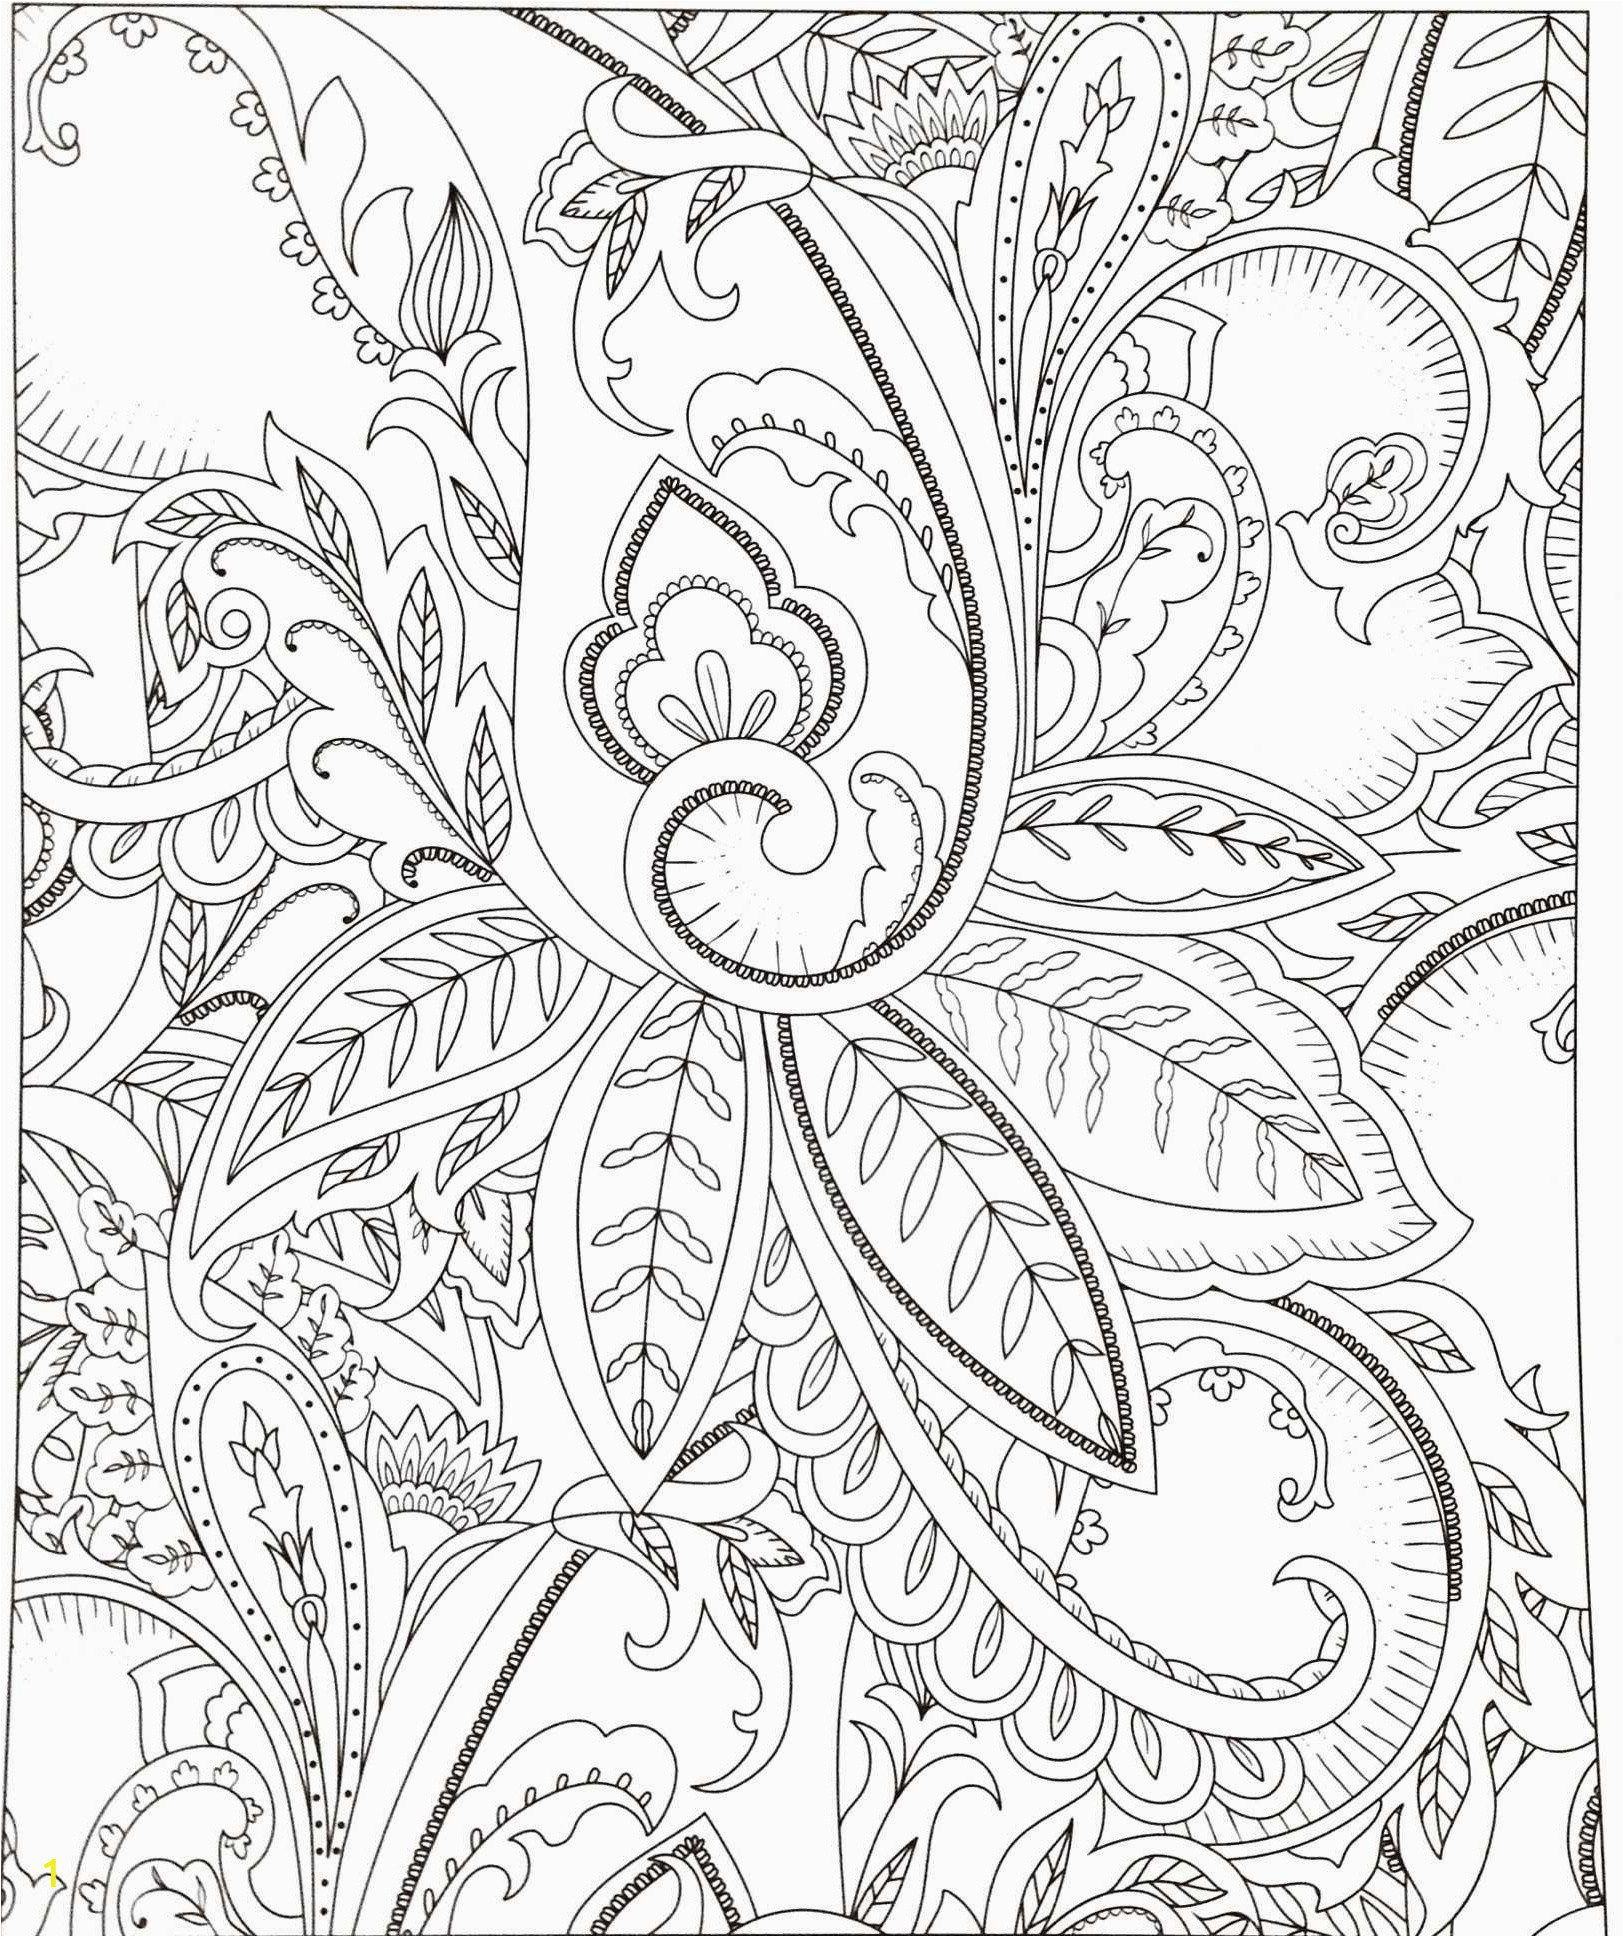 States Of Matter Coloring Page 21 New S United States Map Coloring Page